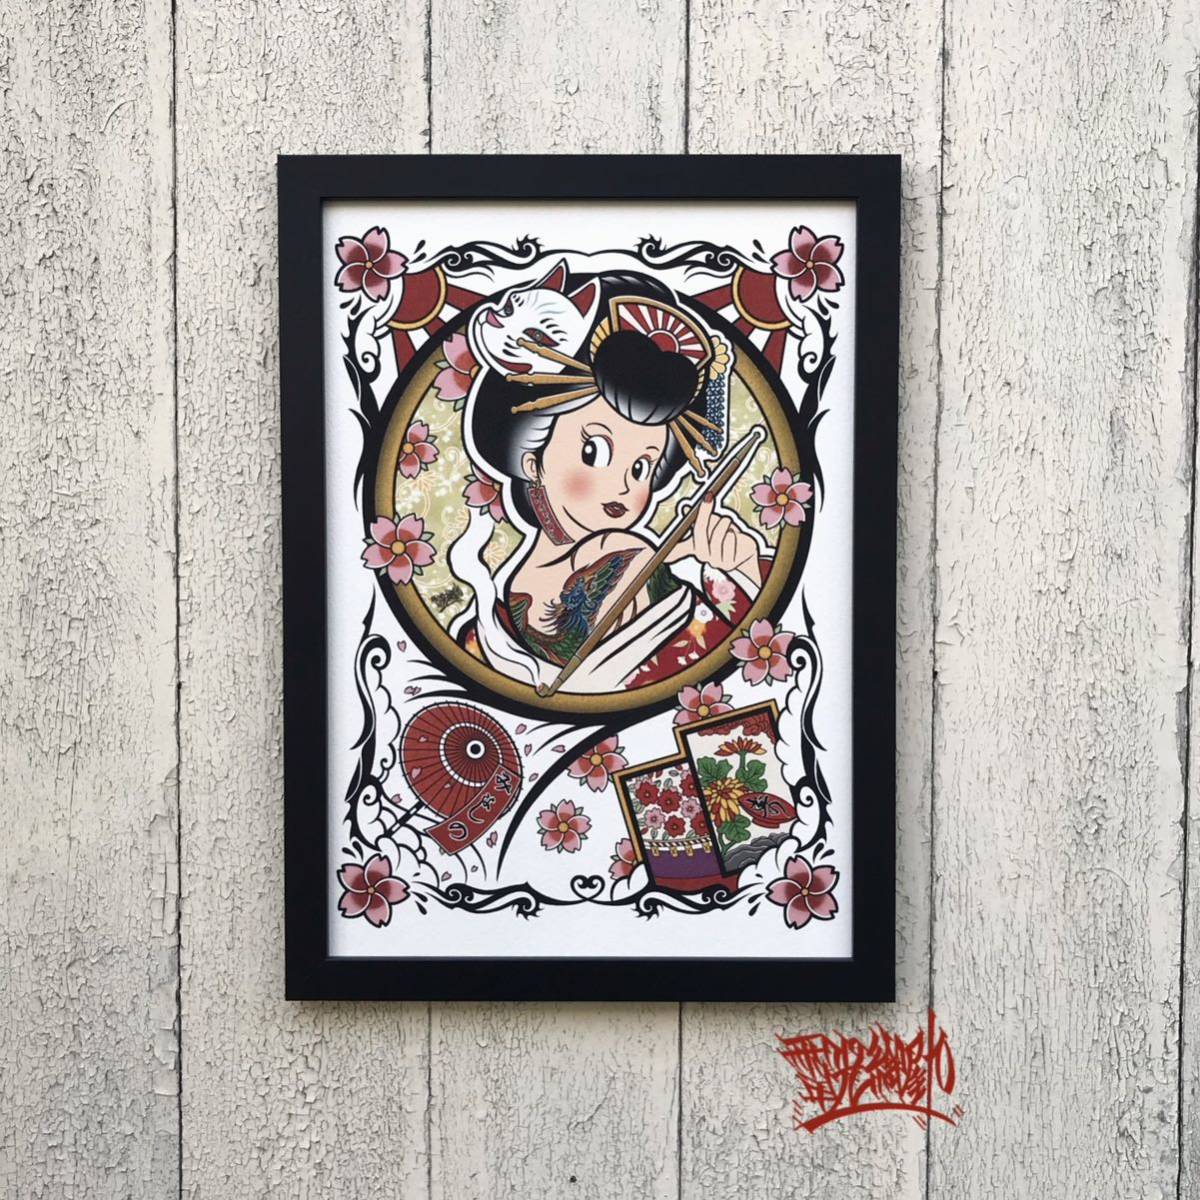 Bikyu, auspicious painting, lucky charm, spring, oiran, hanafuda, drinking at a cherry blossom viewing, A4 size, tattoo, illustration, picture, cherry blossom pattern, fox mask, framed, art frame, Handmade items, interior, miscellaneous goods, ornament, object